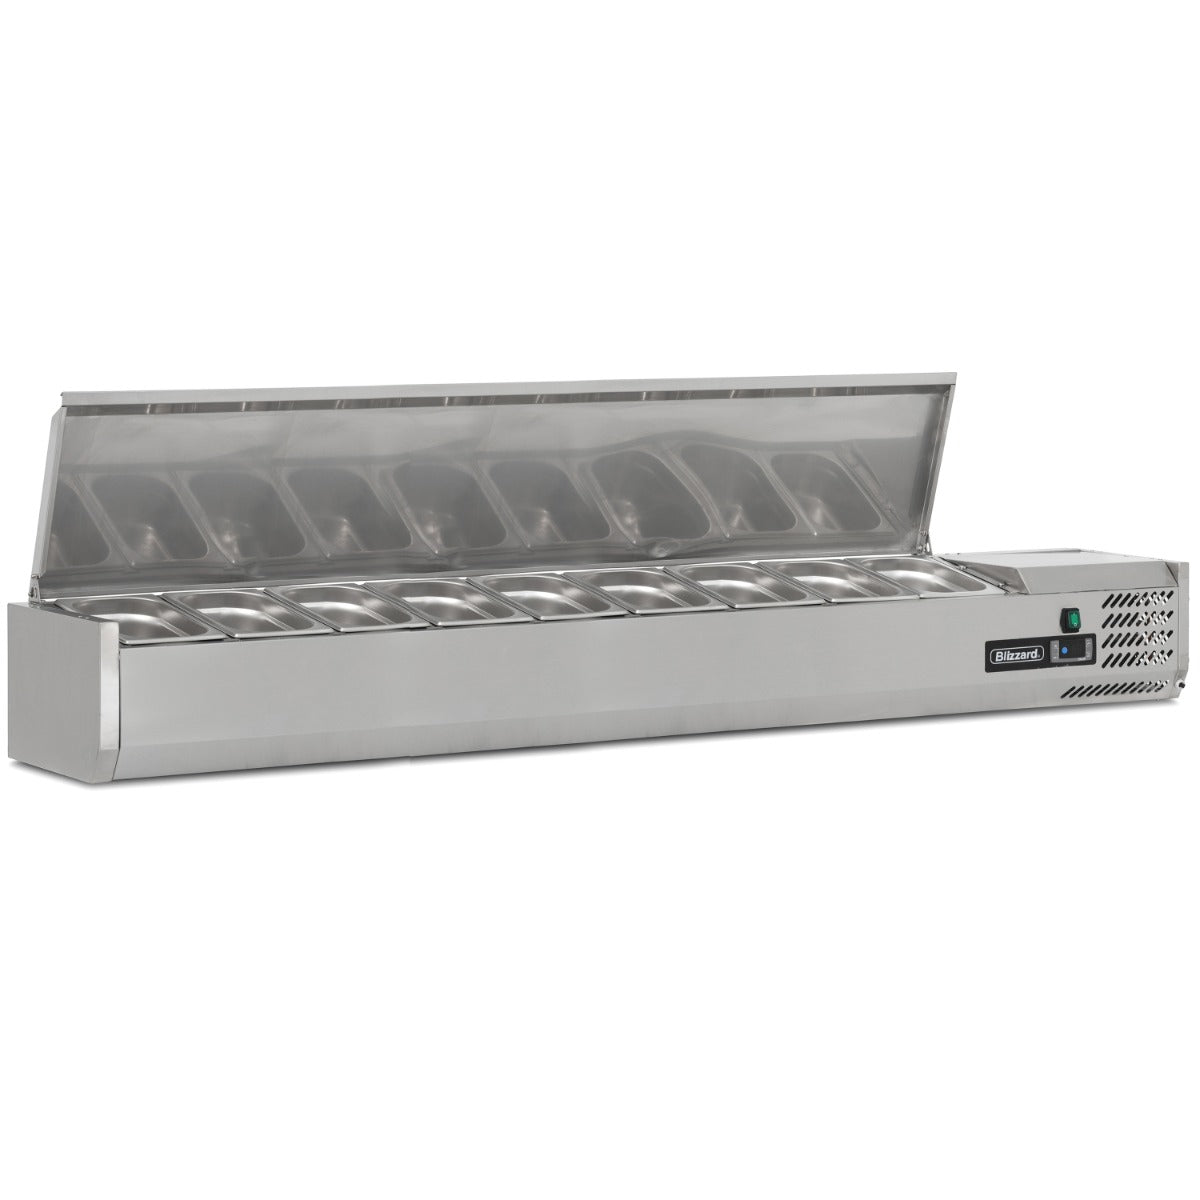 Blizzard 1/4 GASTRONORM PREP TOP WITH HINGED LID 2000MM(W)